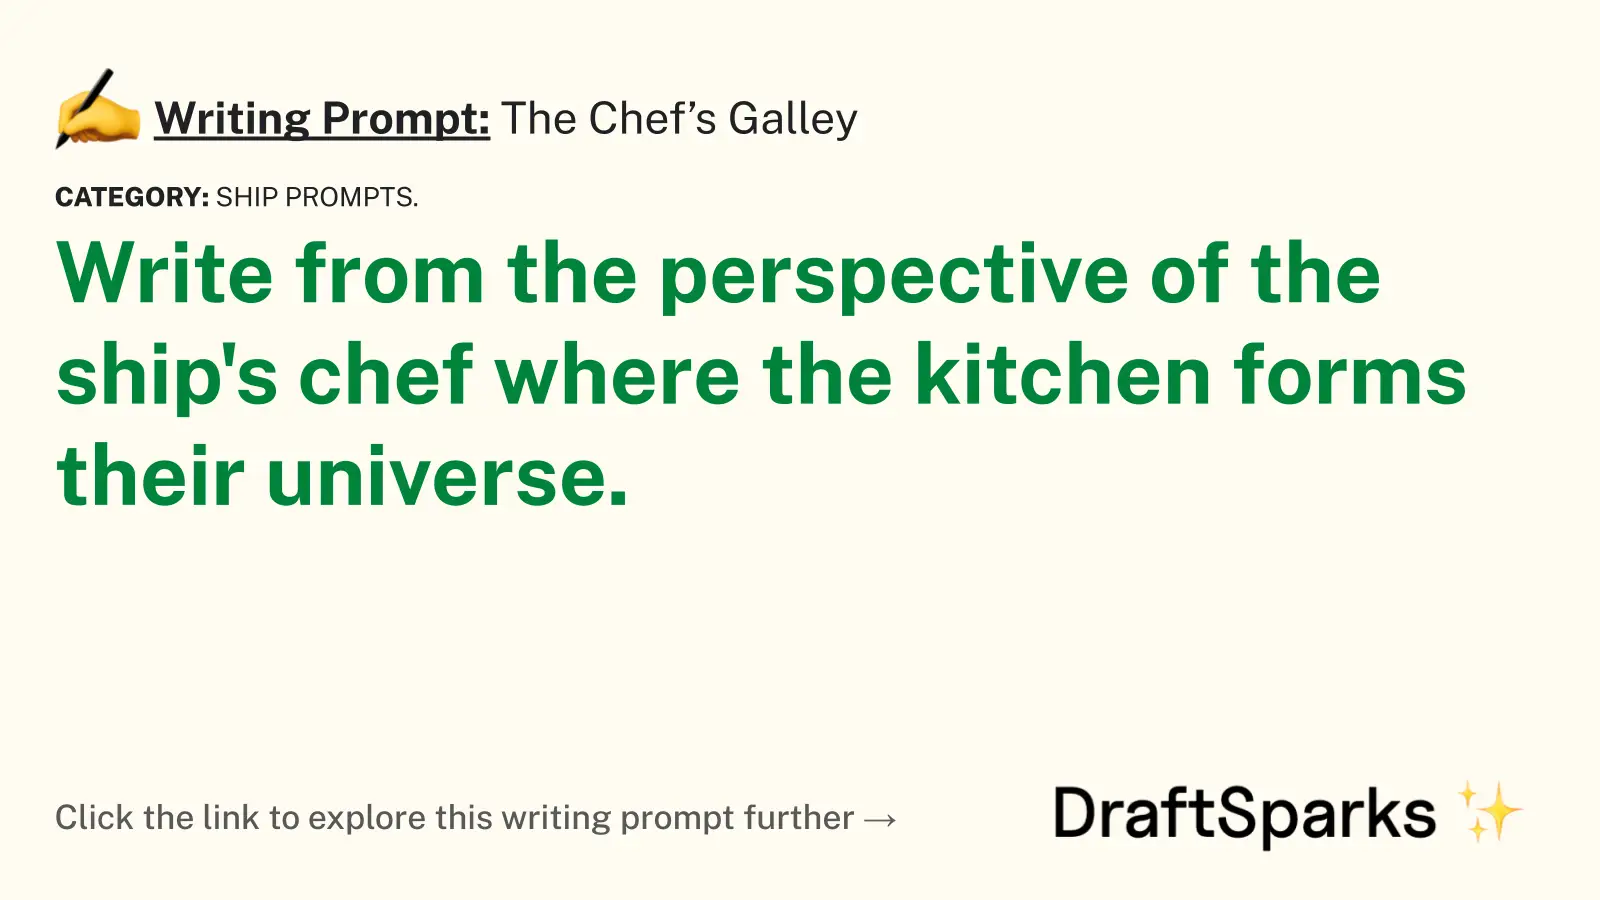 The Chef’s Galley